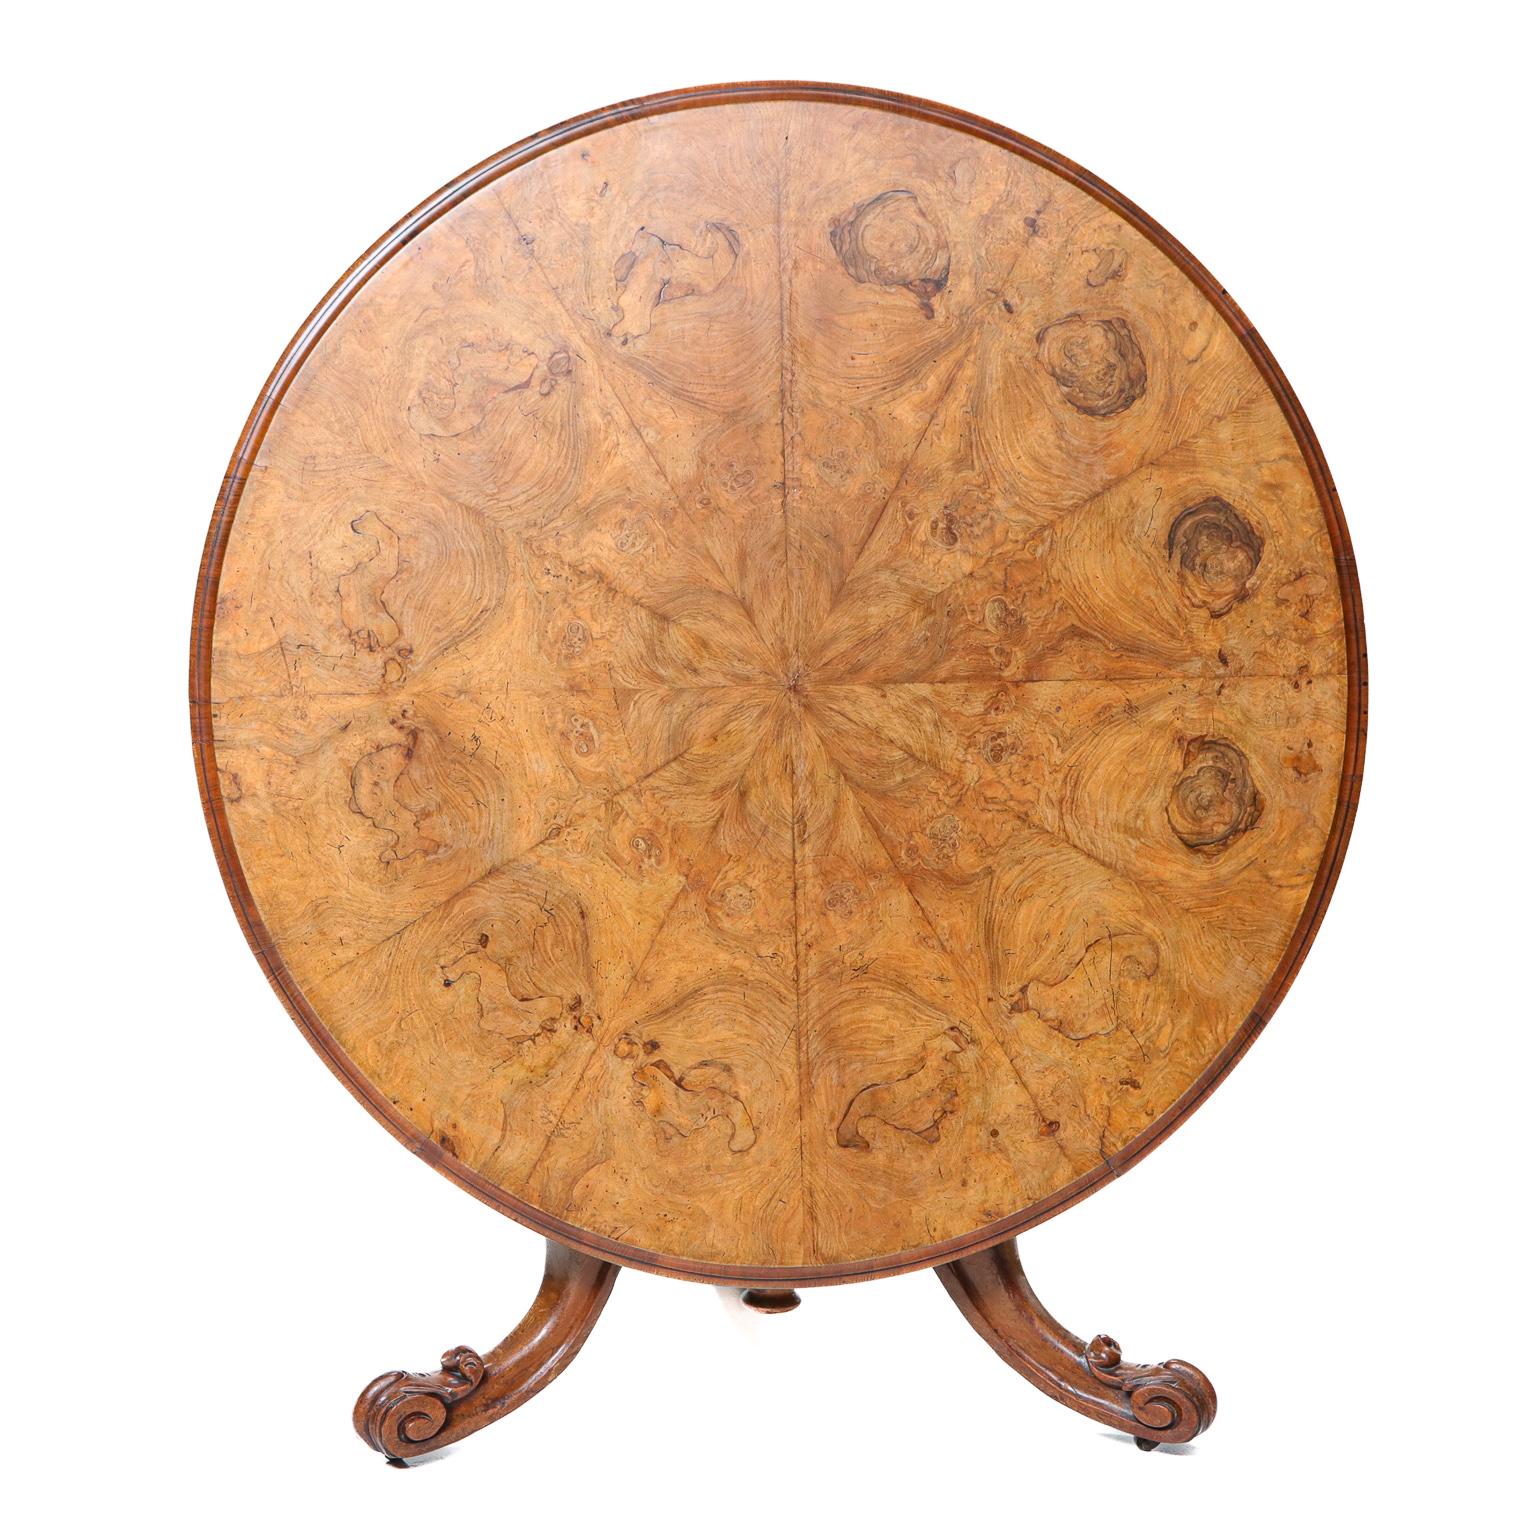 Victorian 19th C. Circular Walnut Tip Top Center Table with Burl Veneered Pie Crust Top For Sale